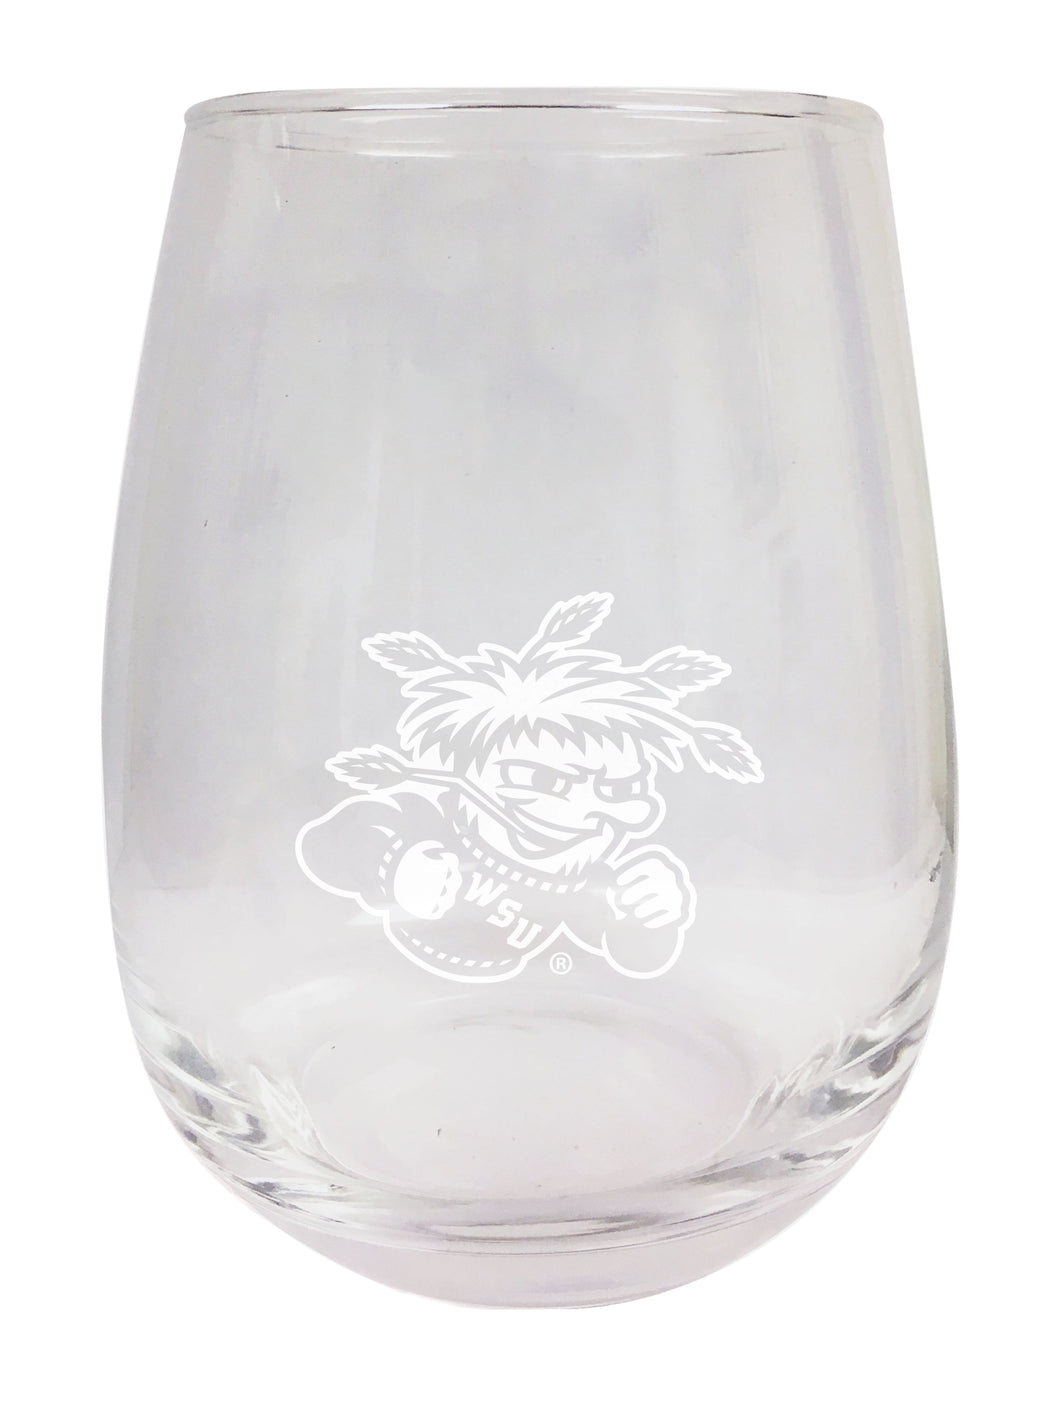 Wichita State Shockers NCAA 15 oz Laser-Engraved Stemless Wine Glass - Perfect for Alumni & Fans